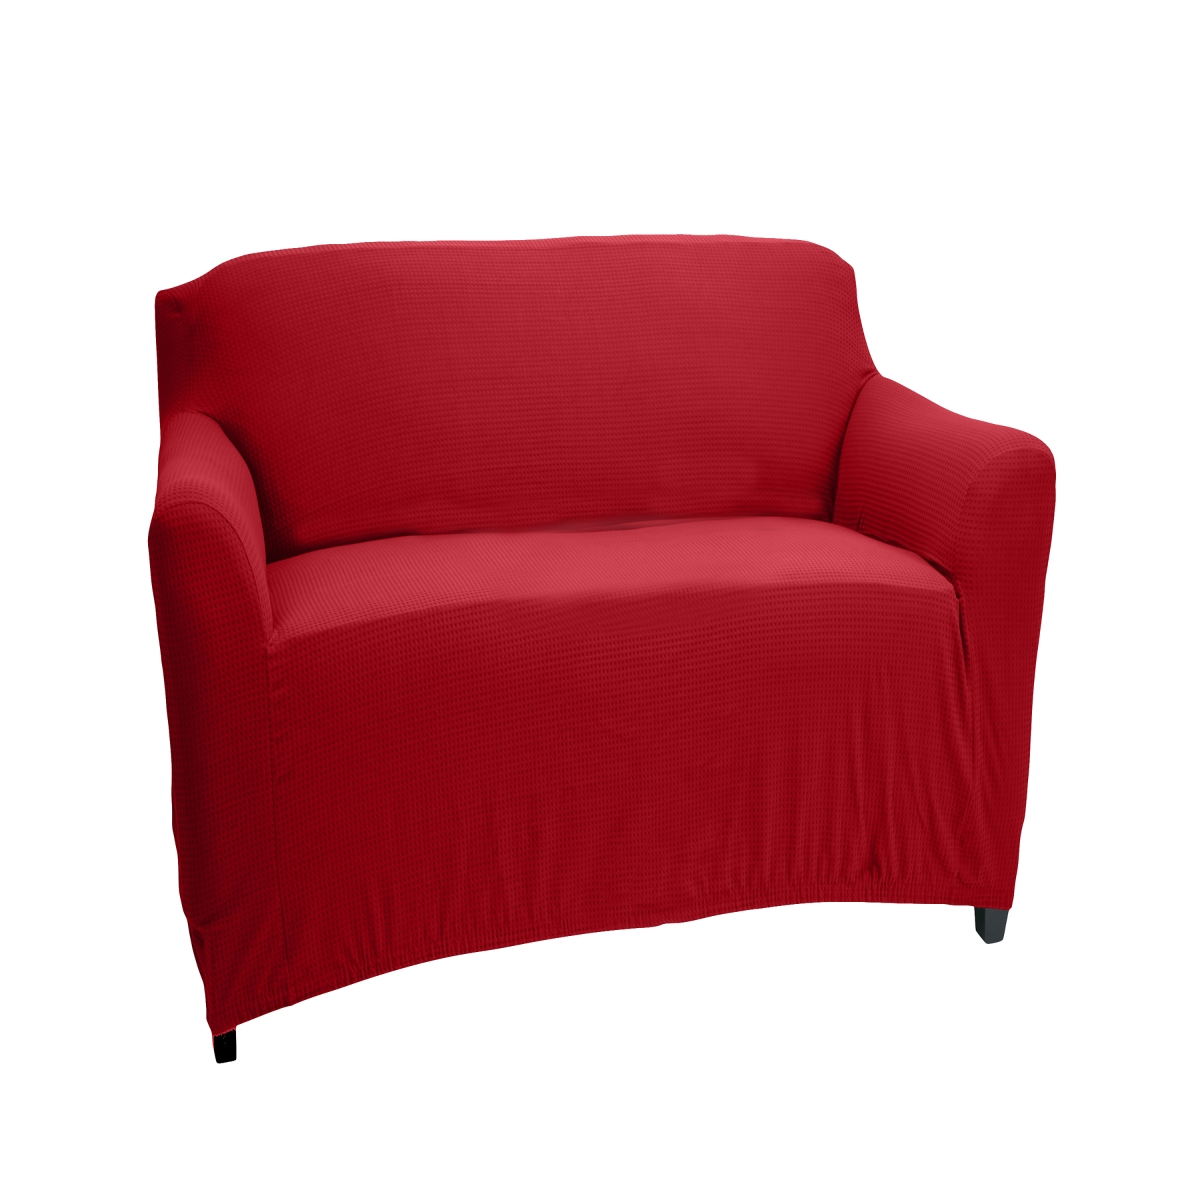 1690-burgundy Waffle Design Chair & Recliner Stretch Fit Slipcover, Burgundy